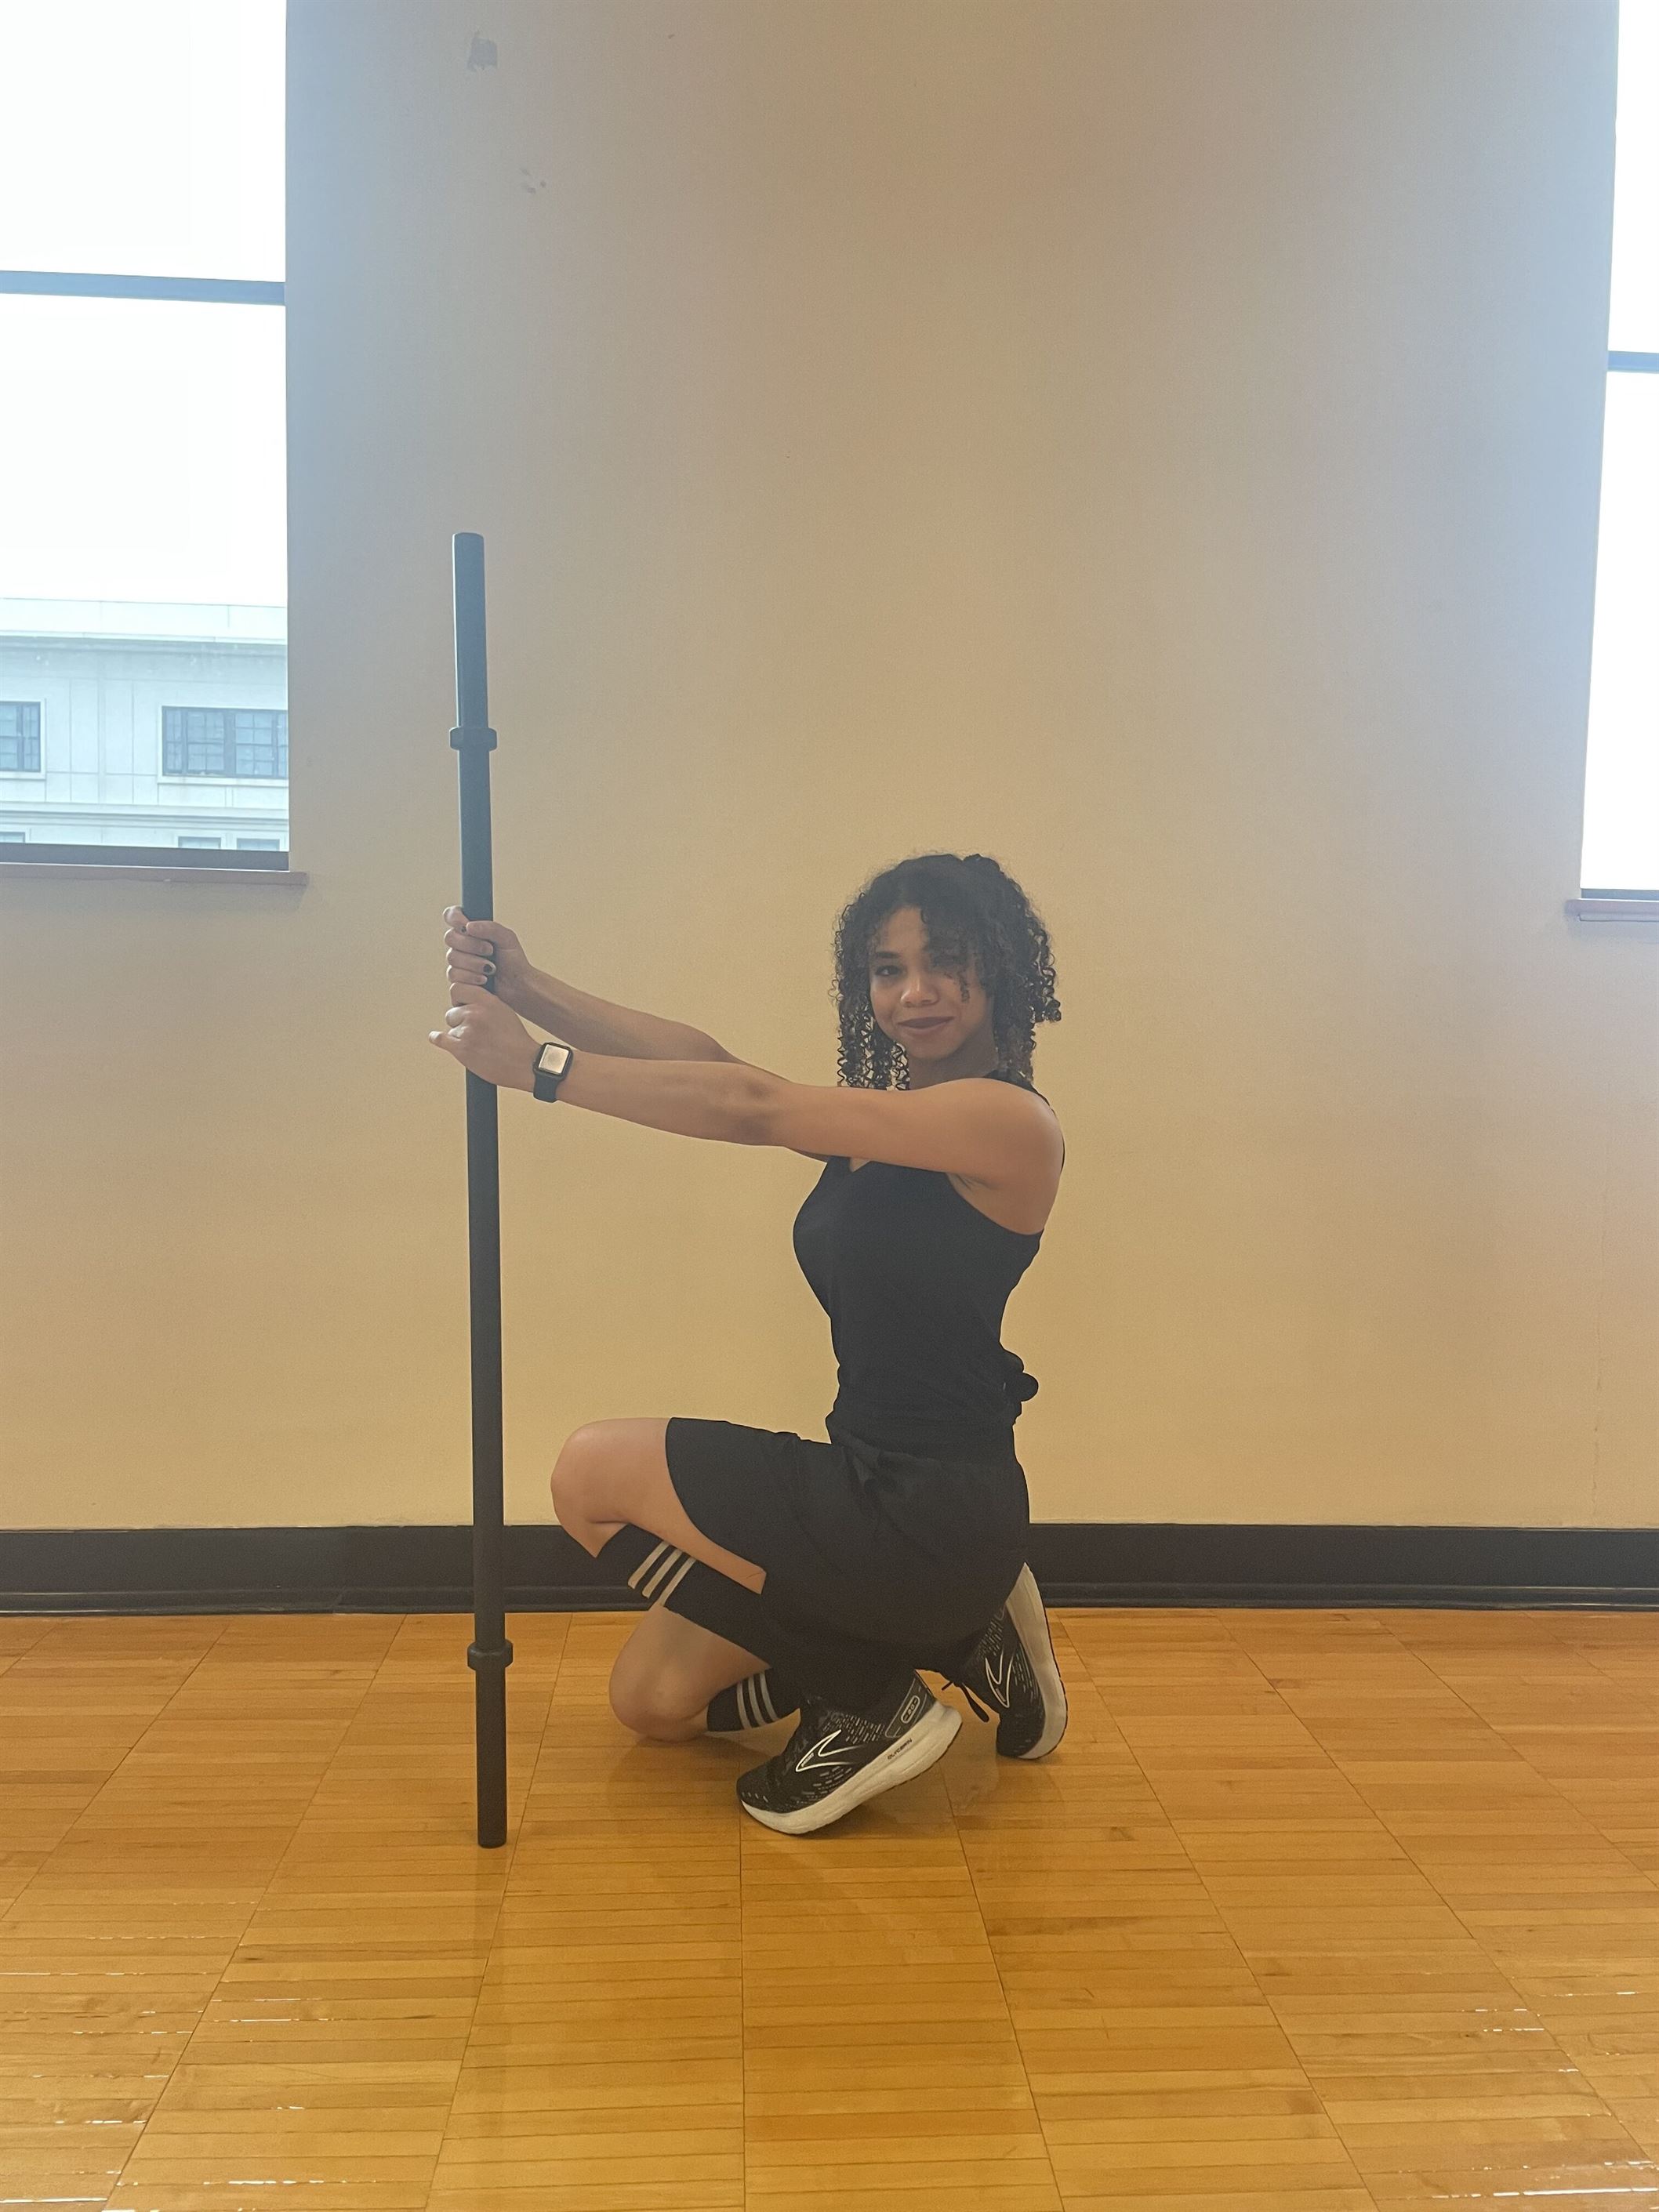 Senior linguistics major Mirit Fournier poses with a barbell during an UpLIFT session.